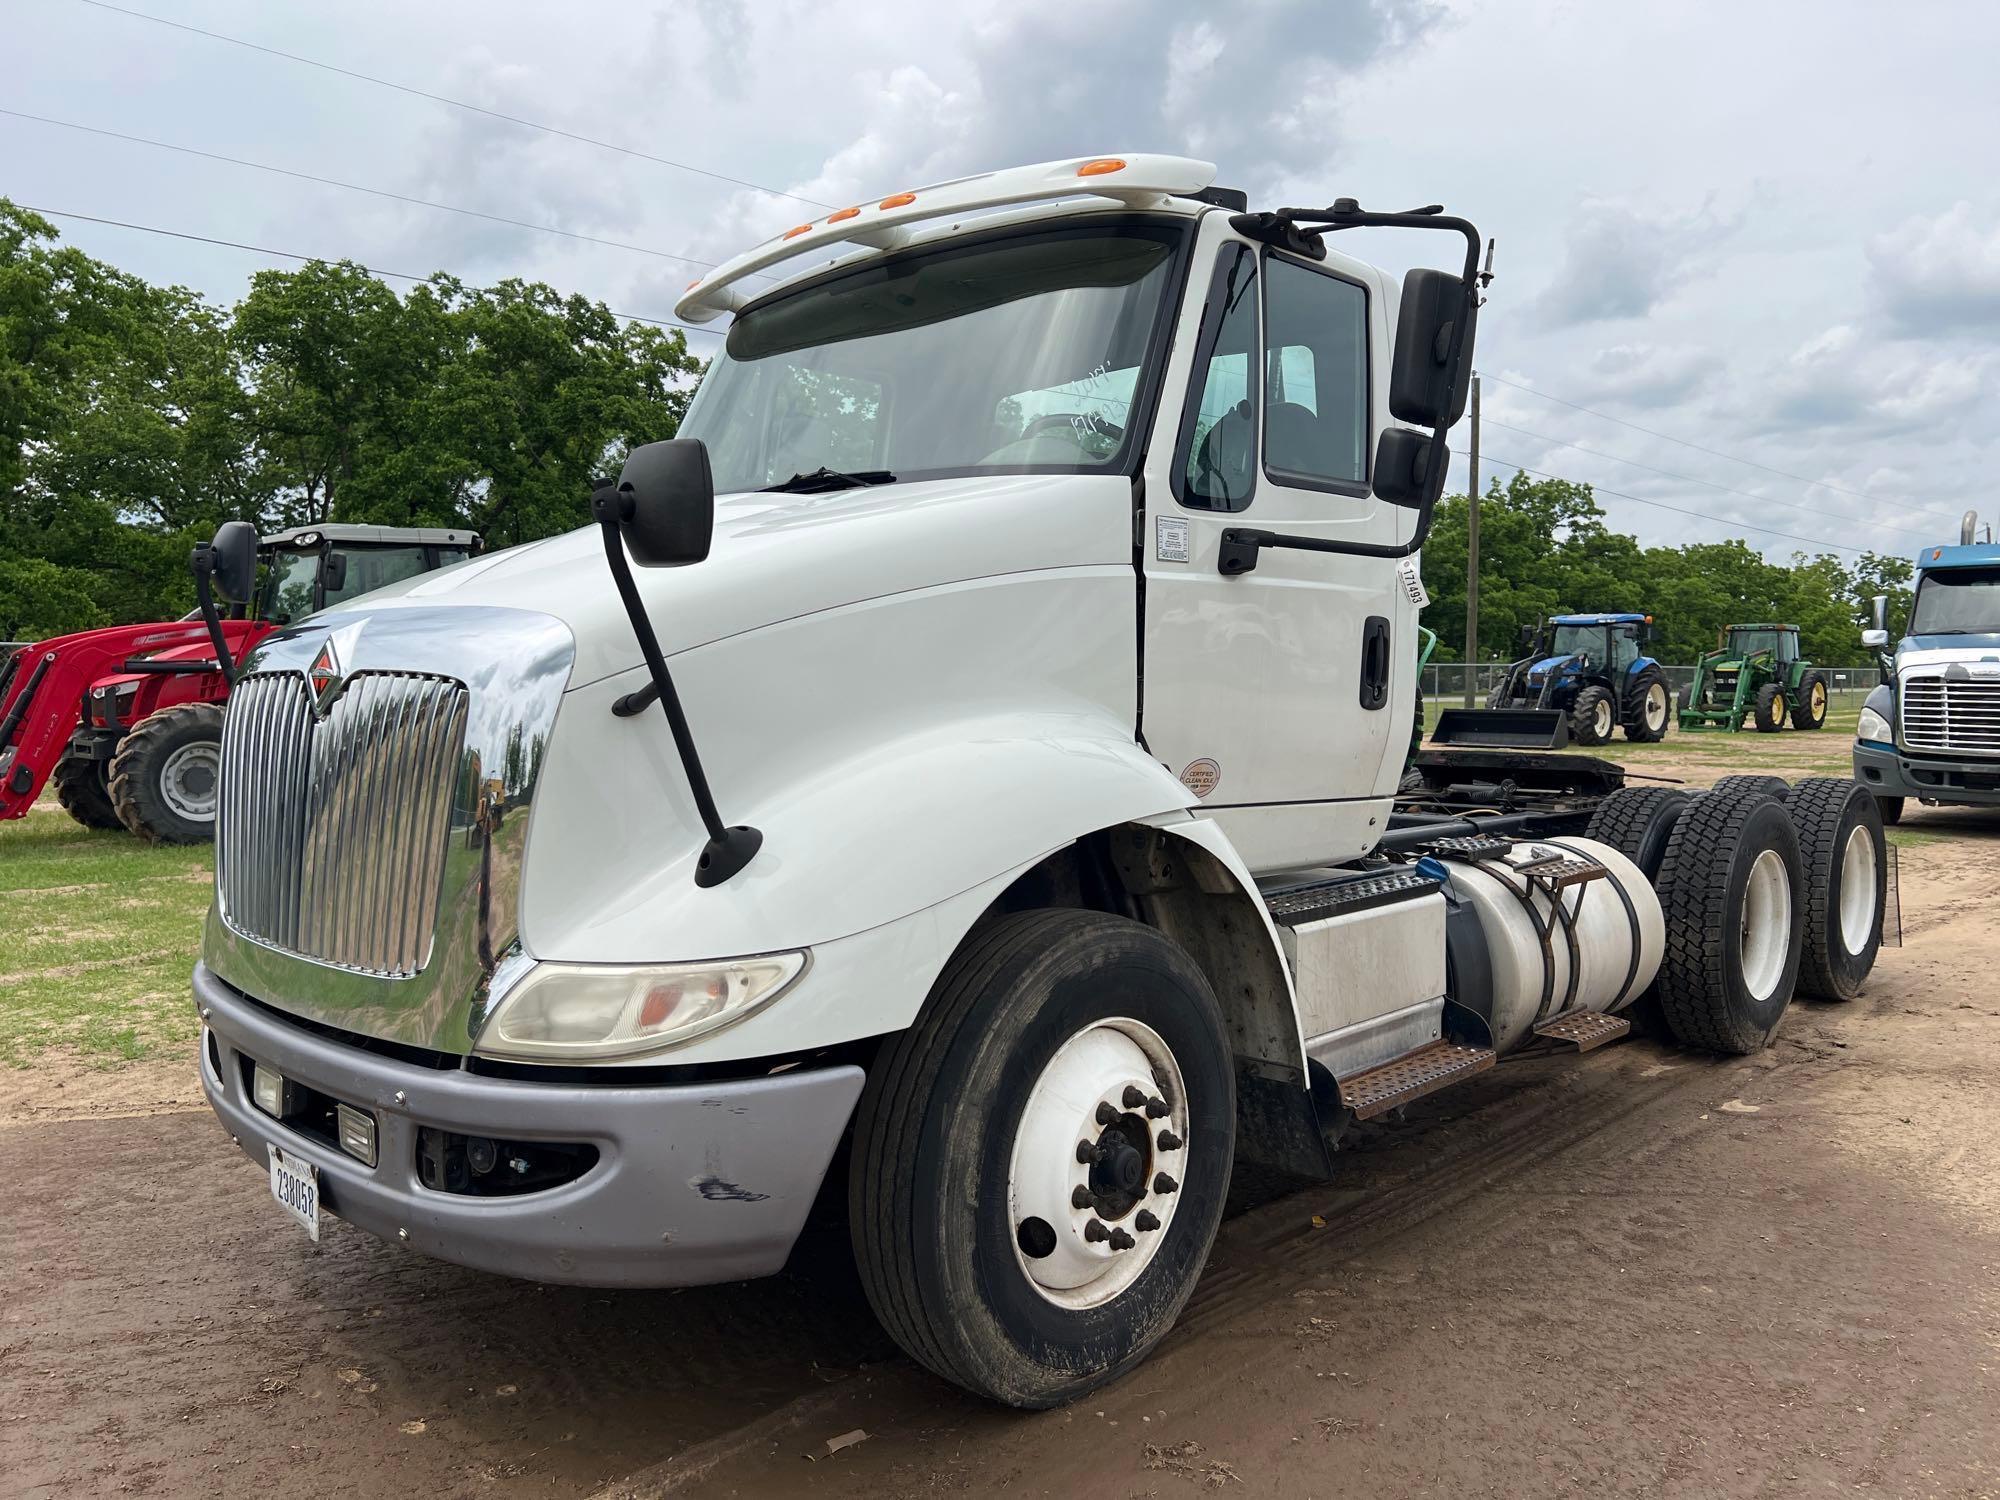 2017 INTERNATIONAL 866 DAY CAB T/A ROAD TRACTOR